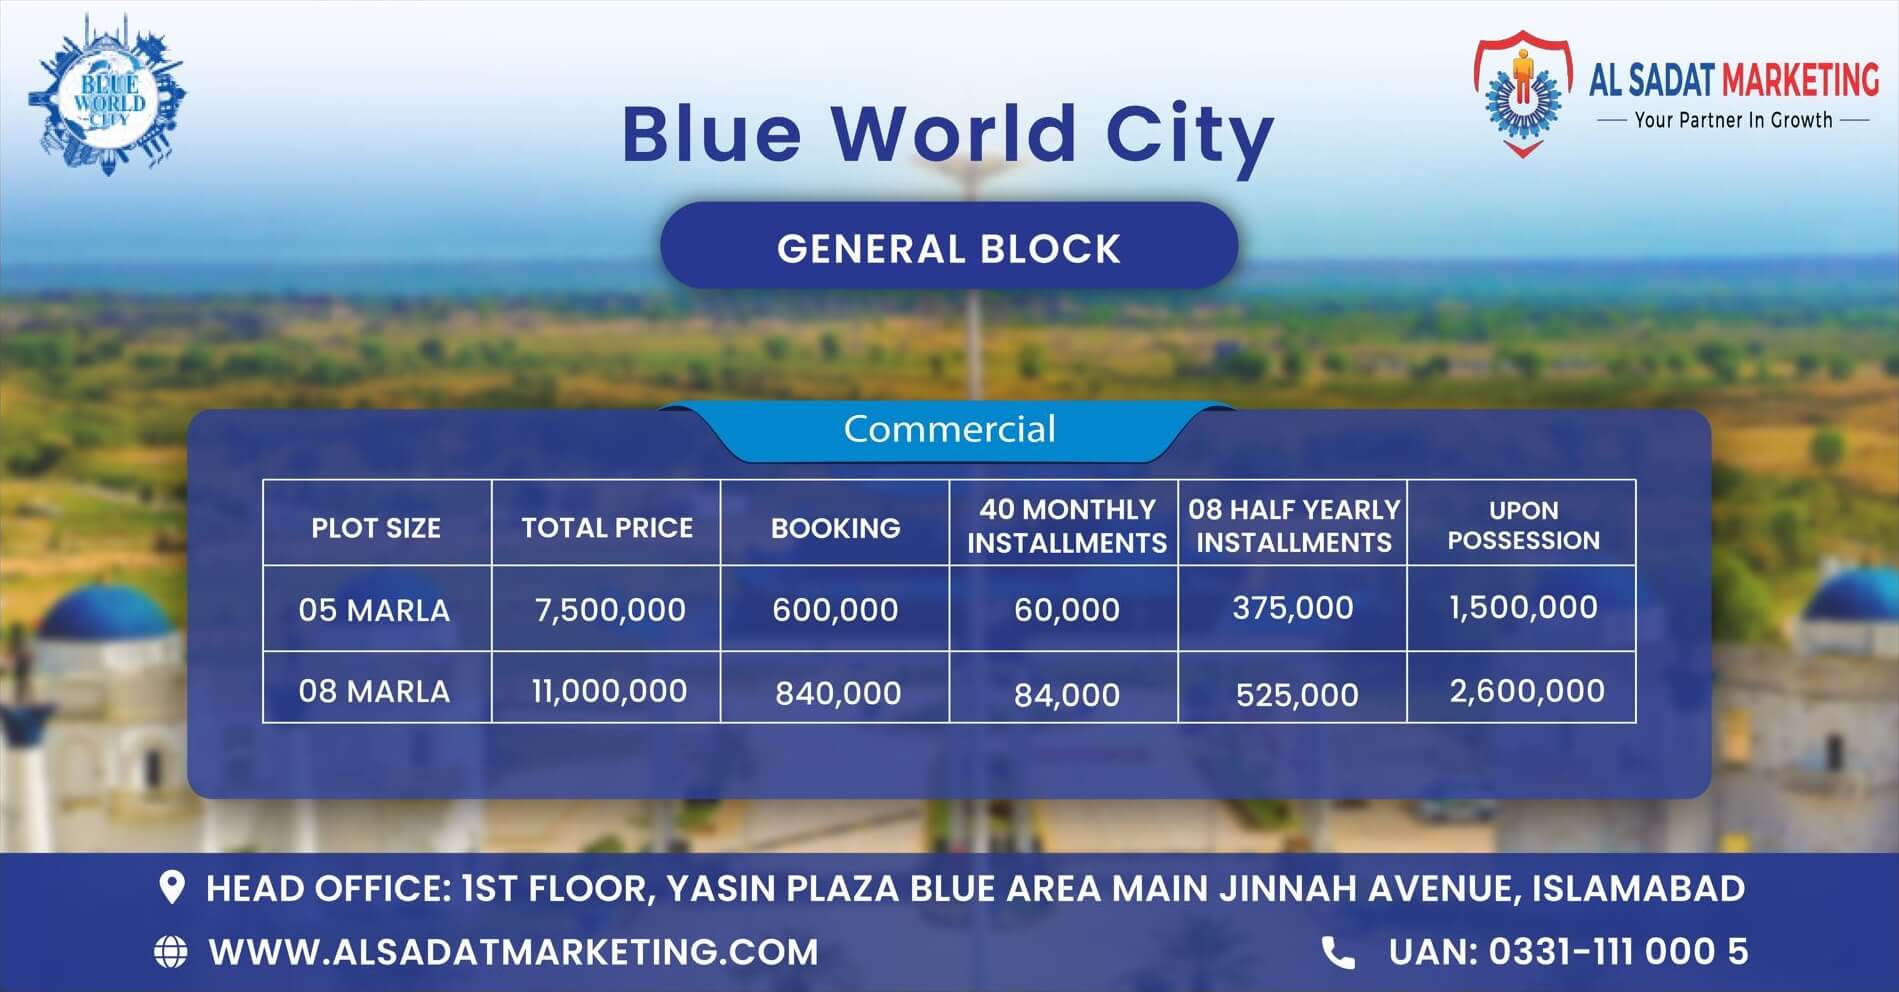 blue world city commercial plots payment plan – blue world city islamabad commercial plots payment plan – blue world city rawalpindi commercial plots payment plan – blue world city general block commercial plots payment plan – blue world city islamabad general block commercial plots payment plan – blue world city rawalpindi general block commercial plots payment plan – blue world city payment plan – blue world city islamabad payment plan - blue world city rawalpindi payment plan – blue world city– blue world city islamabad – blue world city rawalpindi– blue world city housing society – blue world city islamabad housing society – blue world city real estate project – blue world city islamabad real estate project - al sadat marketing - alsadat marketing - al-sadat marketing